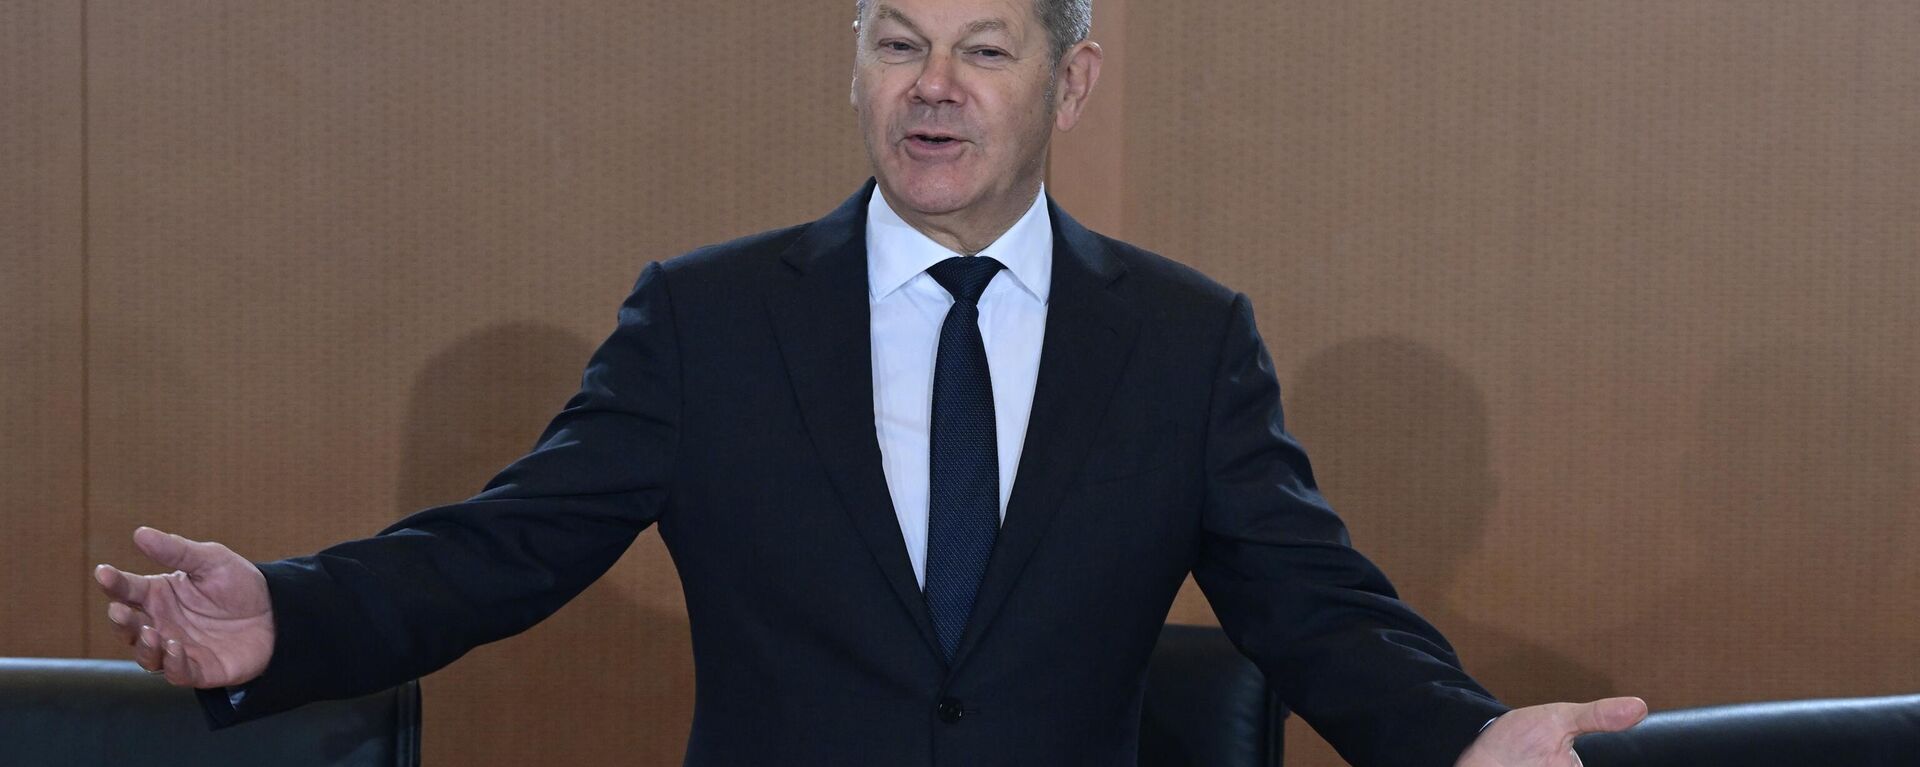 German Chancellor Olaf Scholz thanks cabinet members after a year of the governmental coalition, on December 7, 2022, during a meeting of the German cabinet at the chancellery in Berlin - Sputnik International, 1920, 18.12.2022